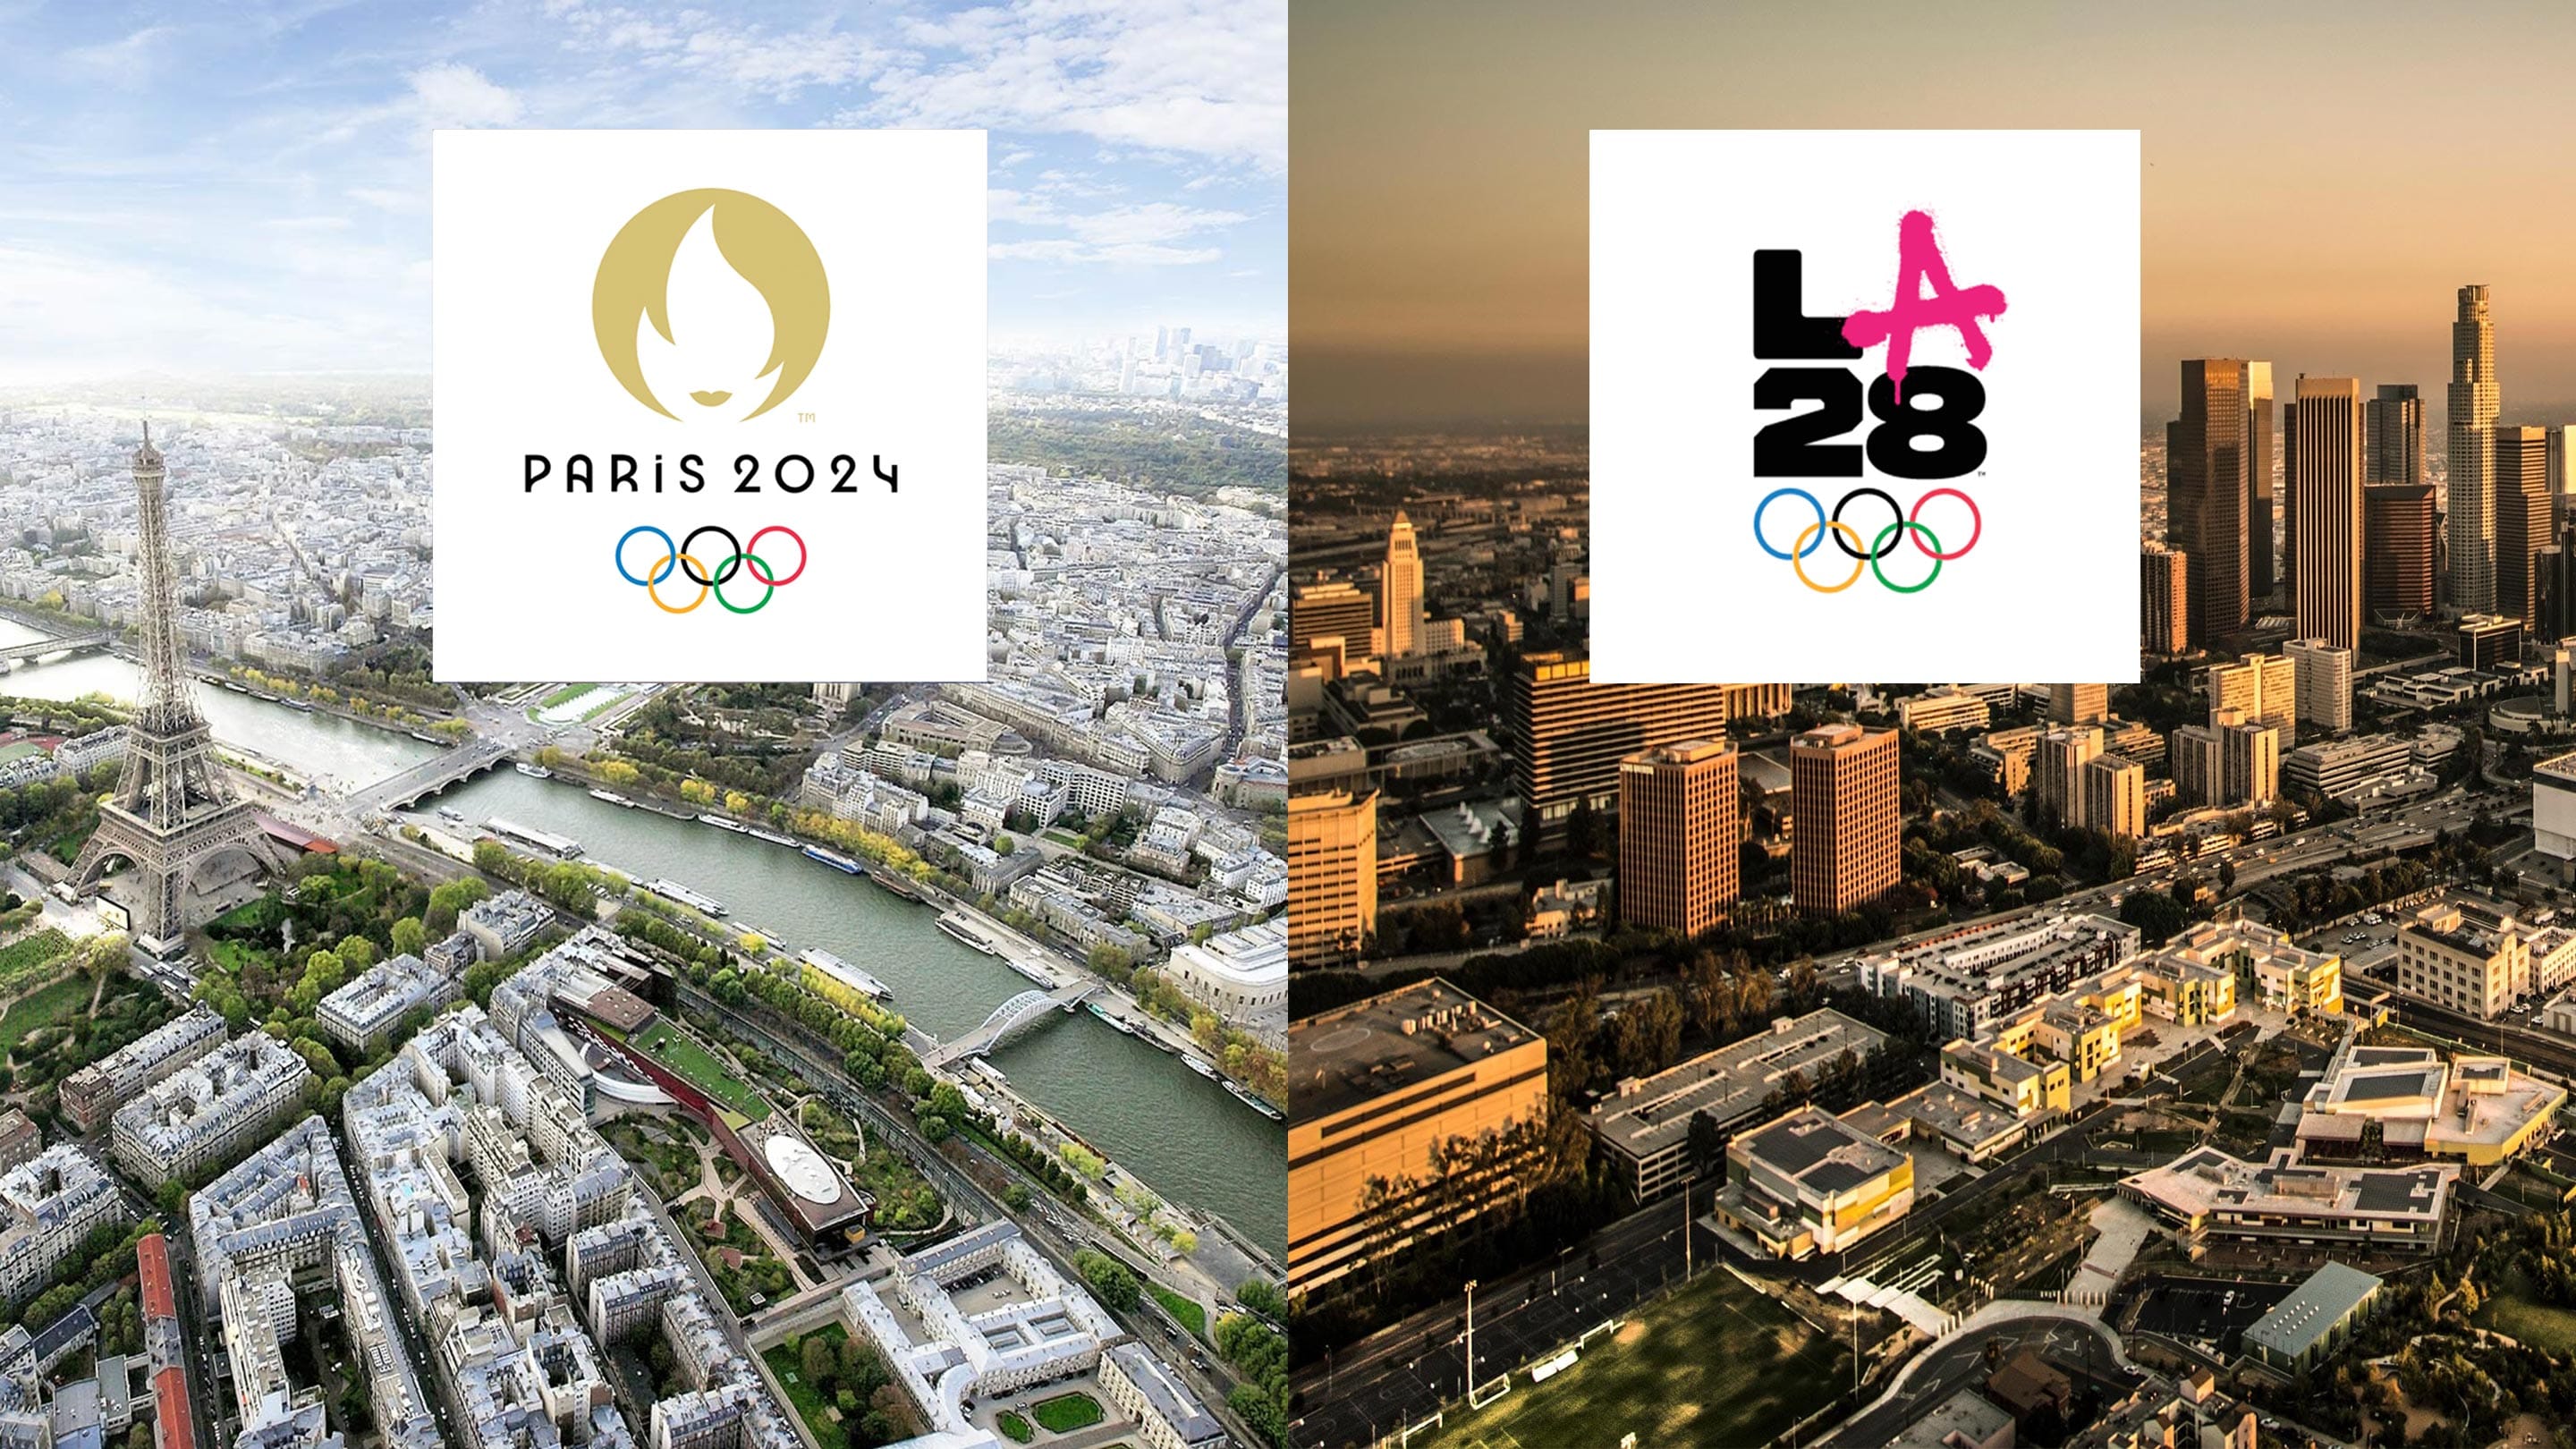 Paris 2024 and LA28 reflect on significant progress as 2022 offers new